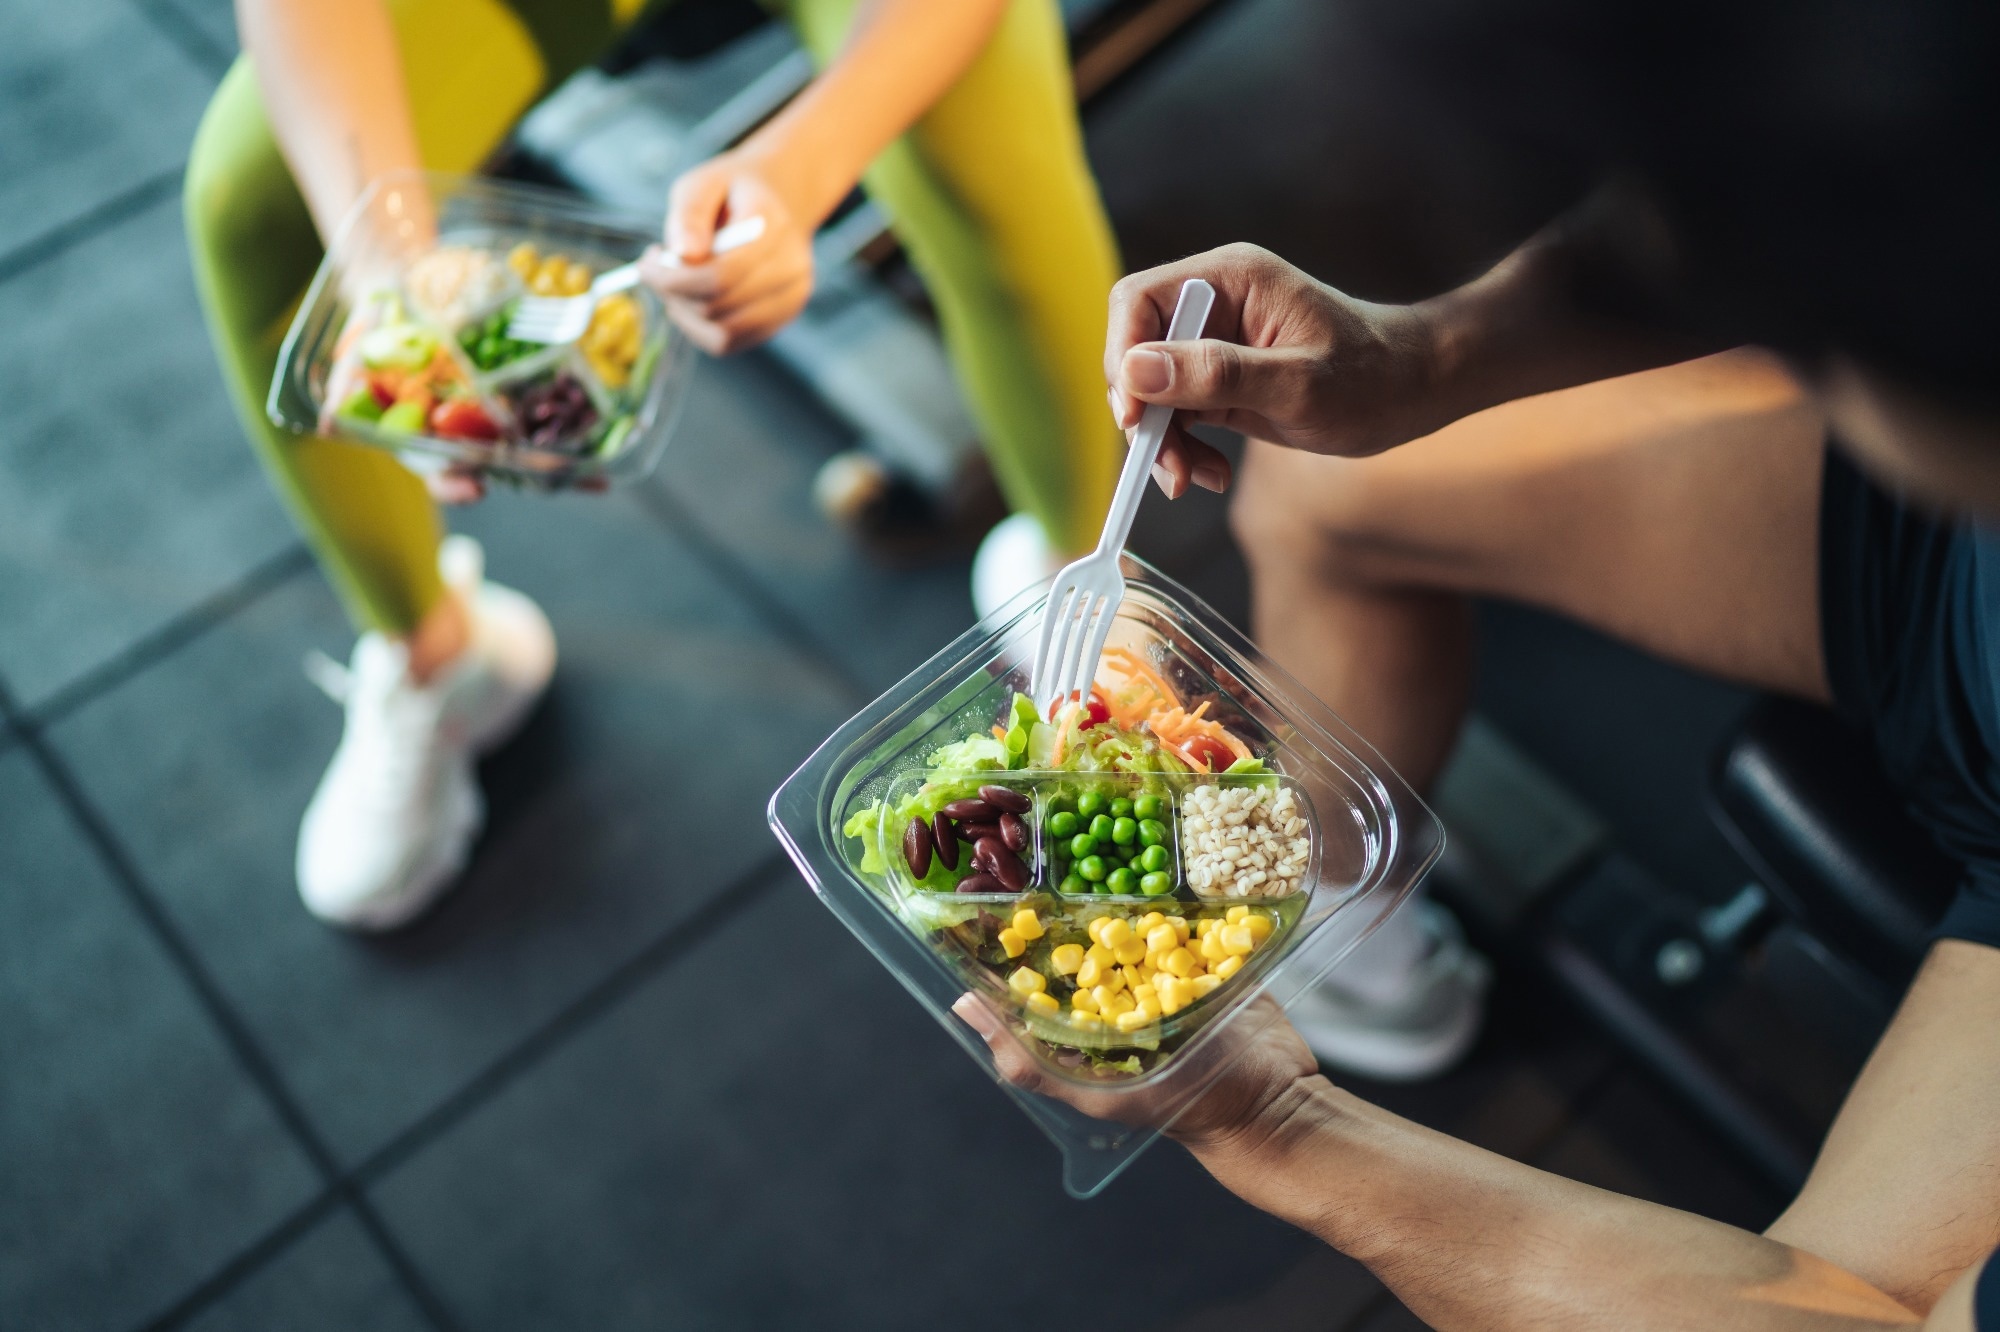 Study: The Relationship between Vegetarian Diet and Sports Performance: A Systematic Review. Image Credit: ME Image/Shutterstock.com